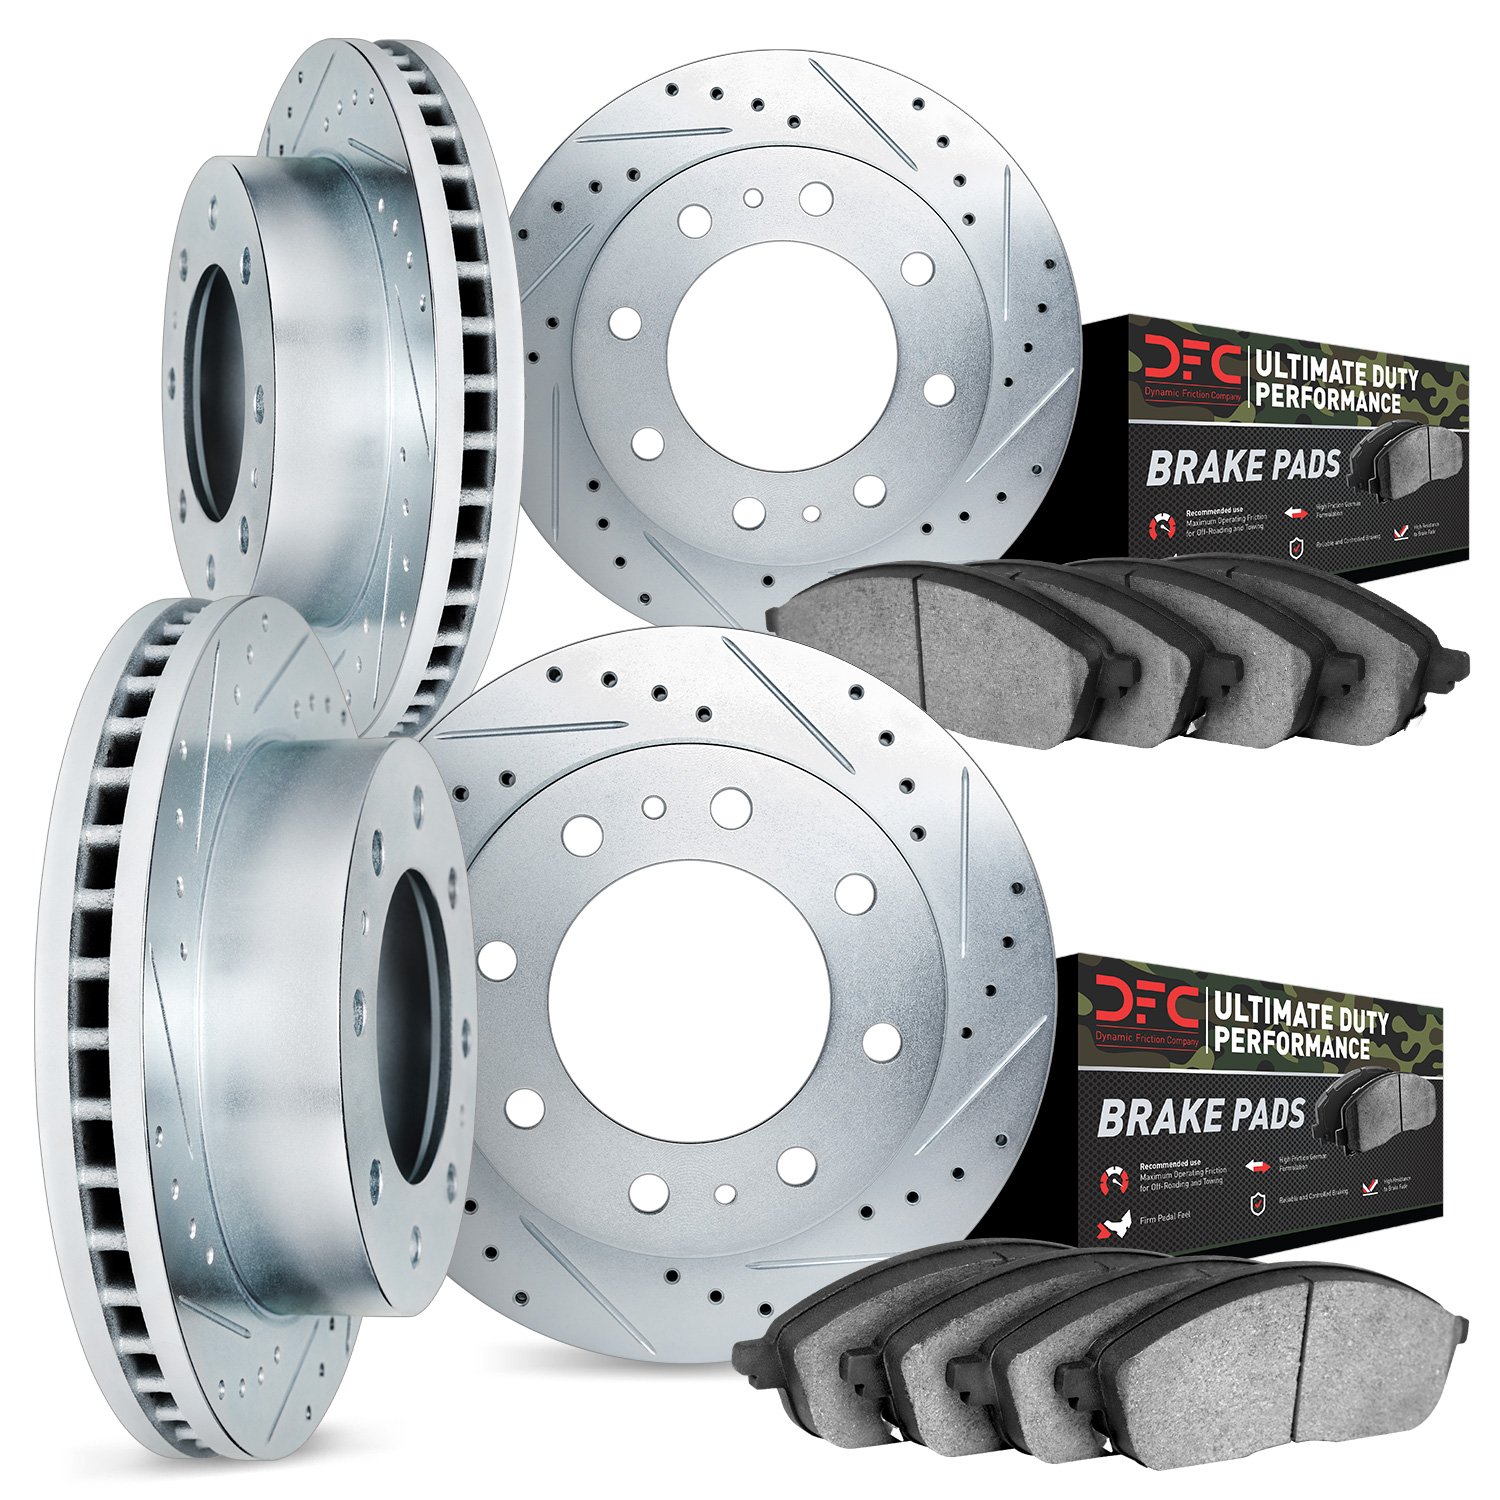 7404-54023 Drilled/Slotted Brake Rotors with Ultimate-Duty Brake Pads Kit [Silver], 2003-2005 Ford/Lincoln/Mercury/Mazda, Positi